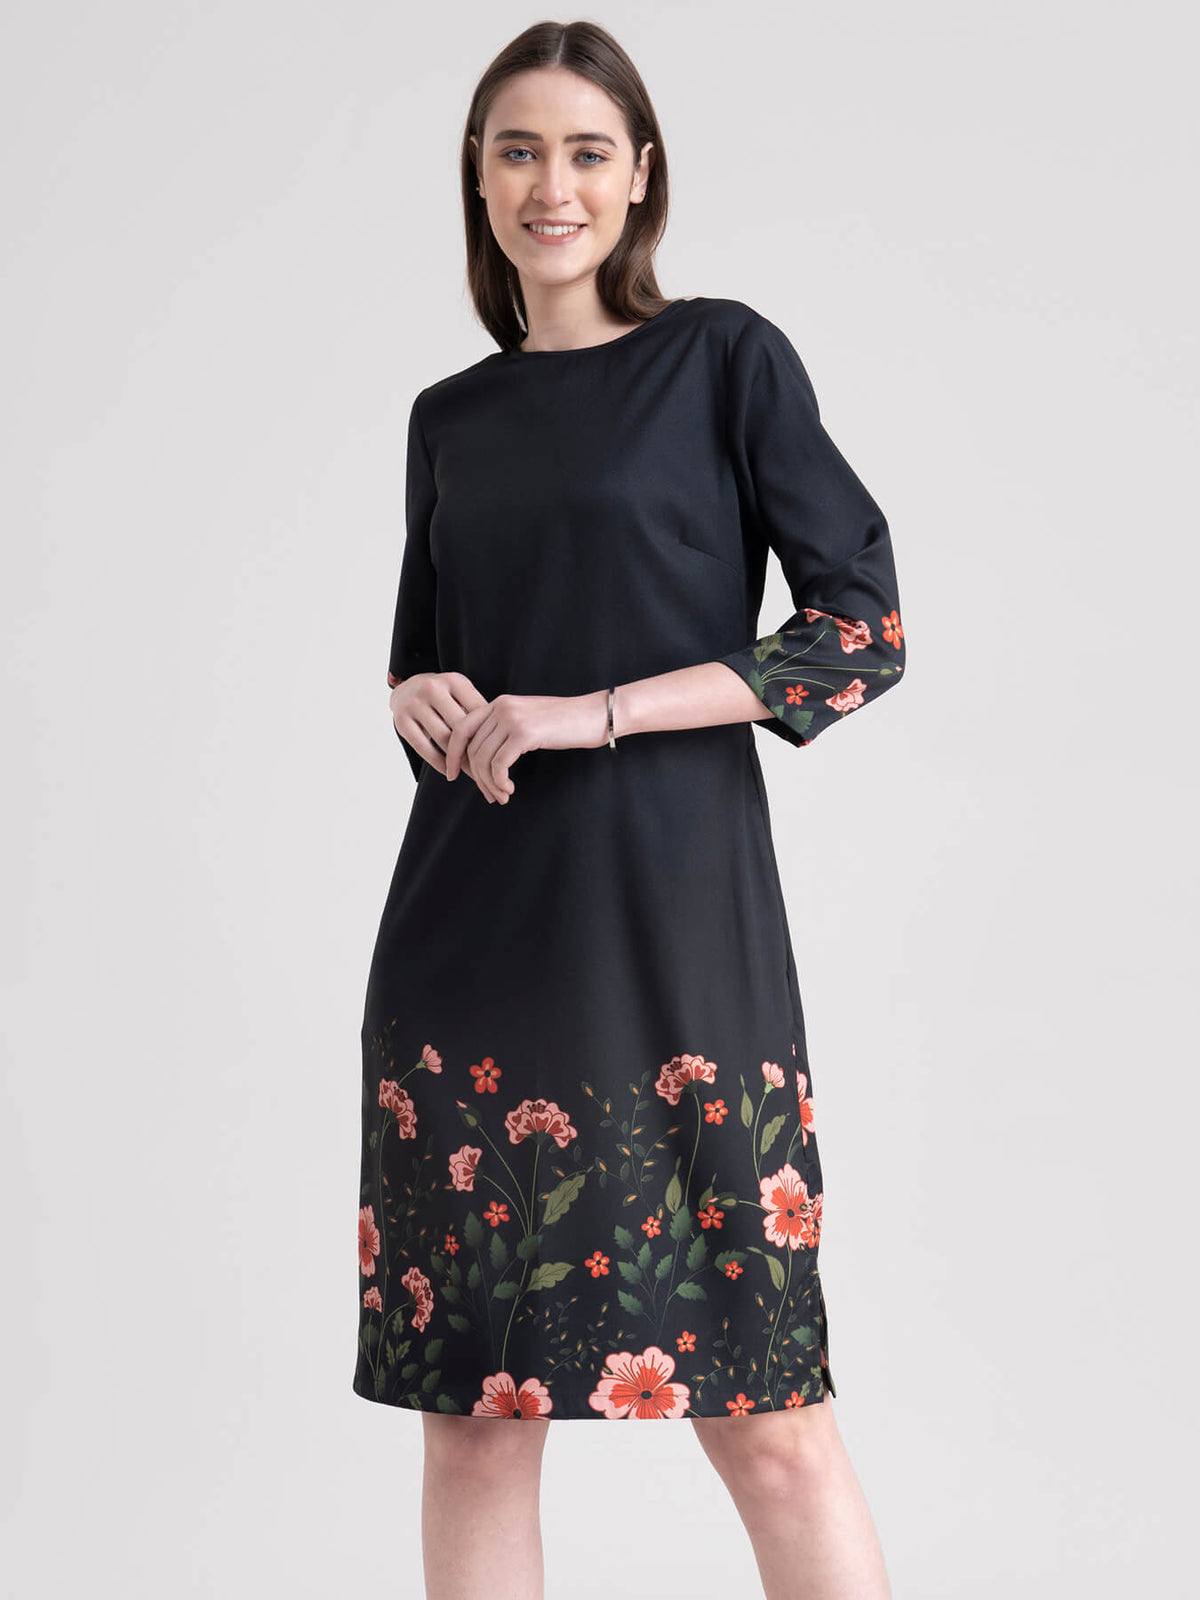 Round Neck Floral Print Shift Dress - Black And Green